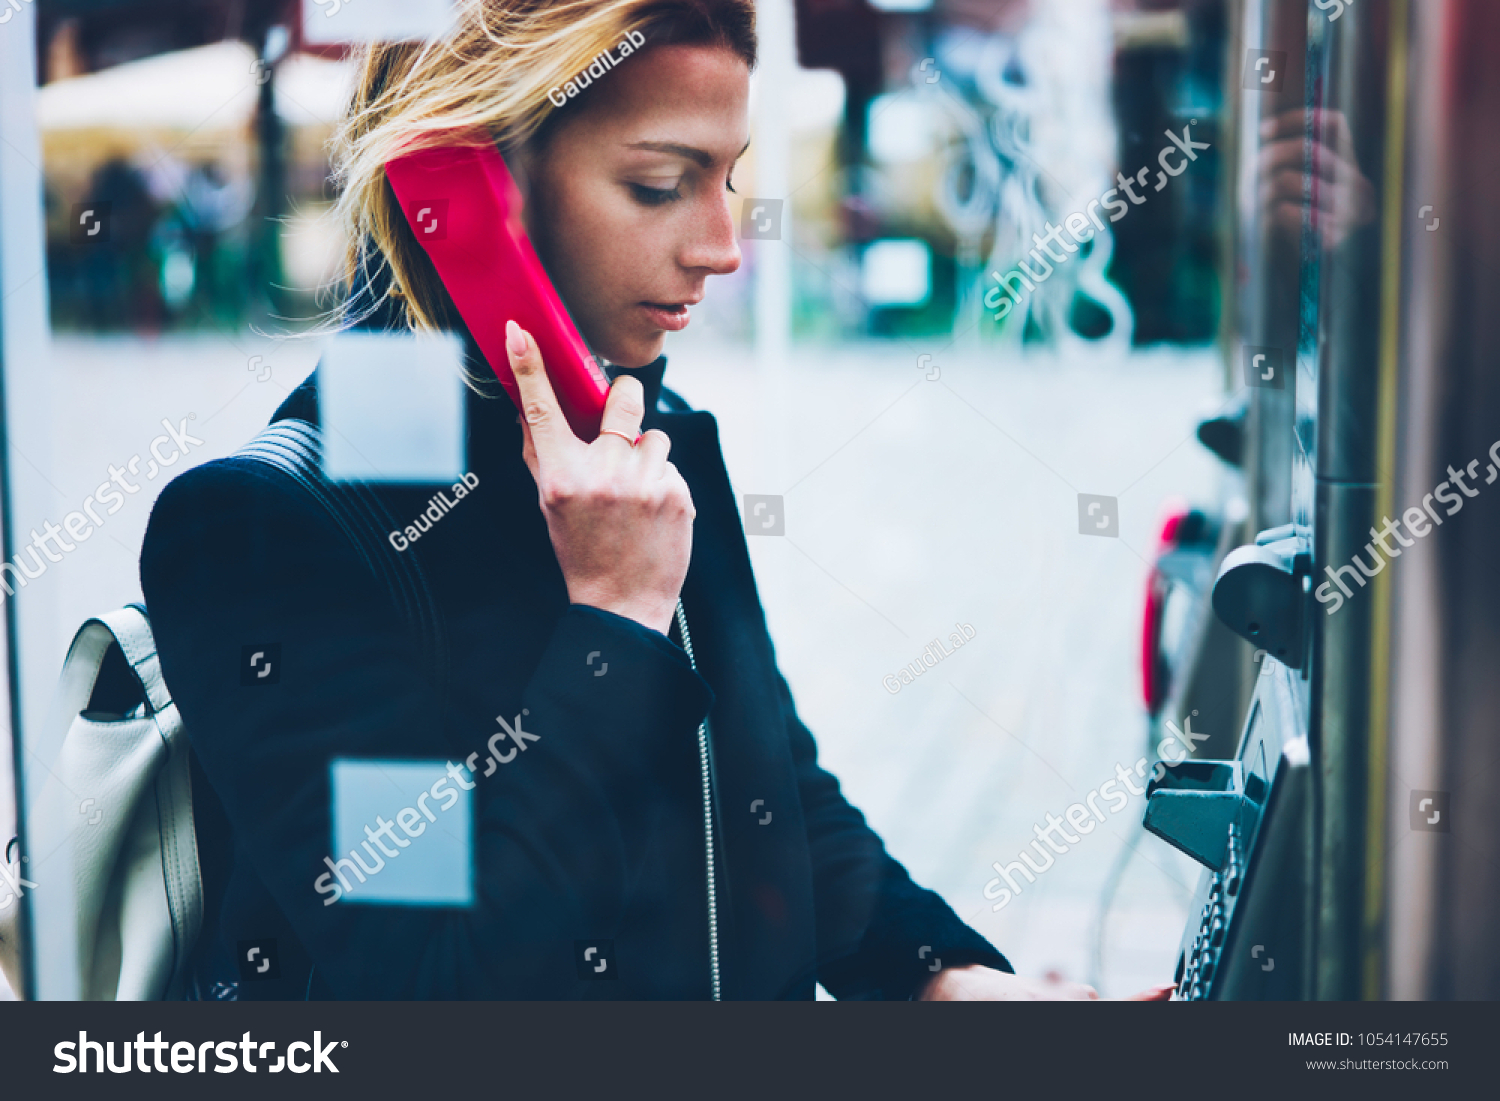 Thoughtful female tourist making call in payphone on street standing in transparent booth, young woman using public telephone operated with coins during travel for call with low prices abroad #1054147655